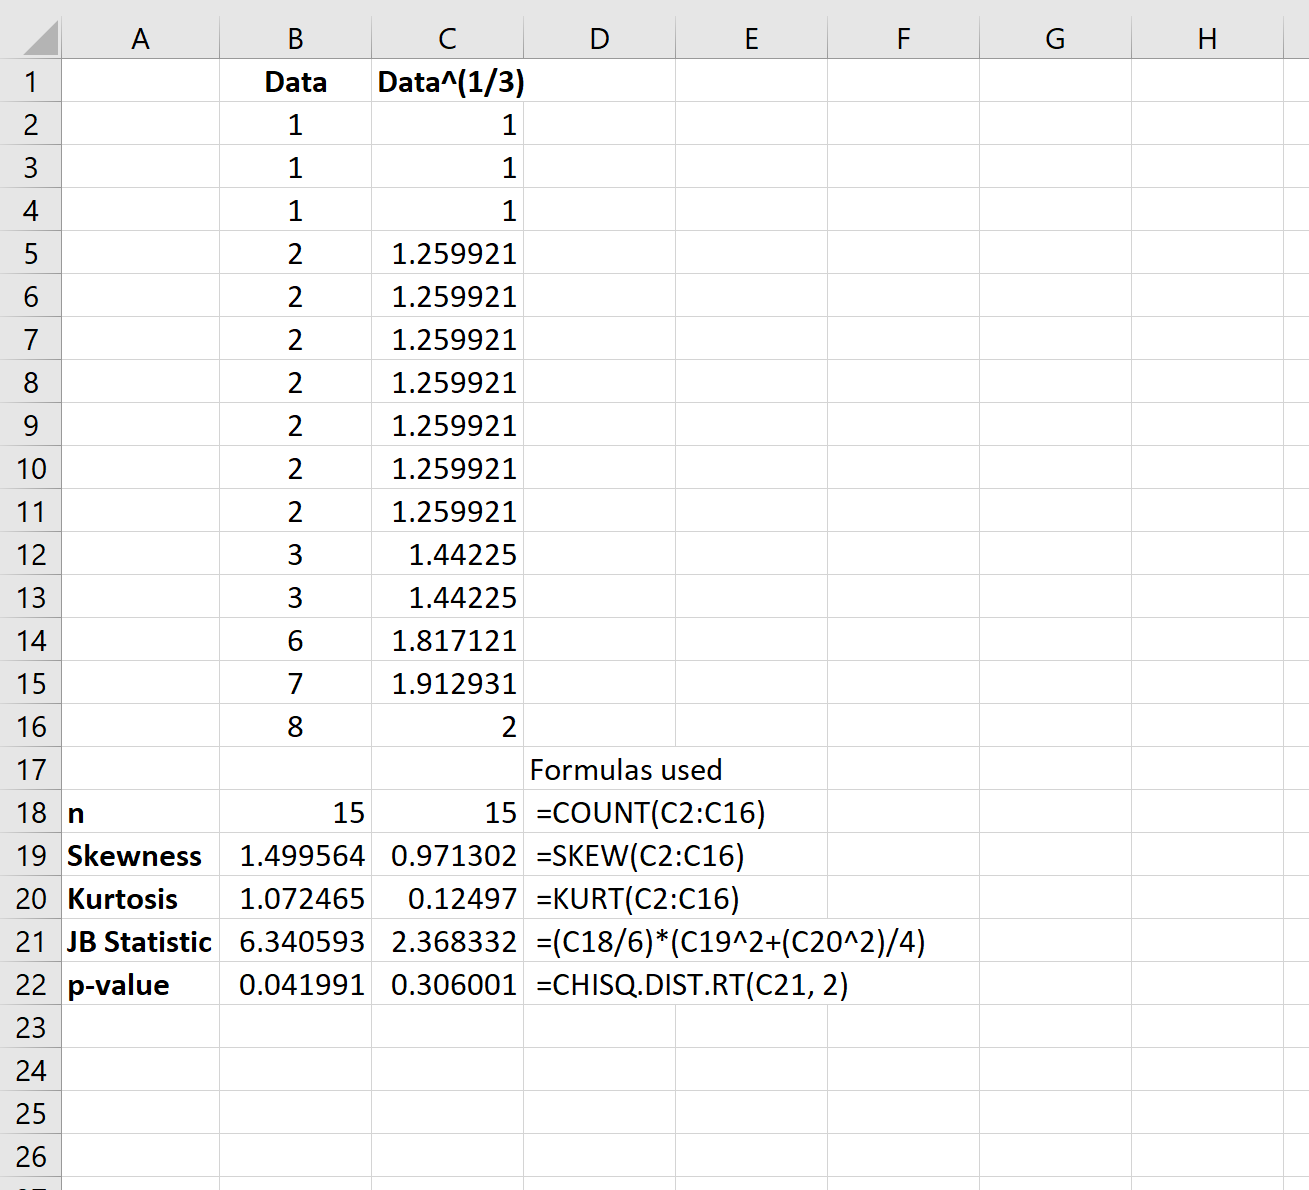 Cube root transformation in Excel